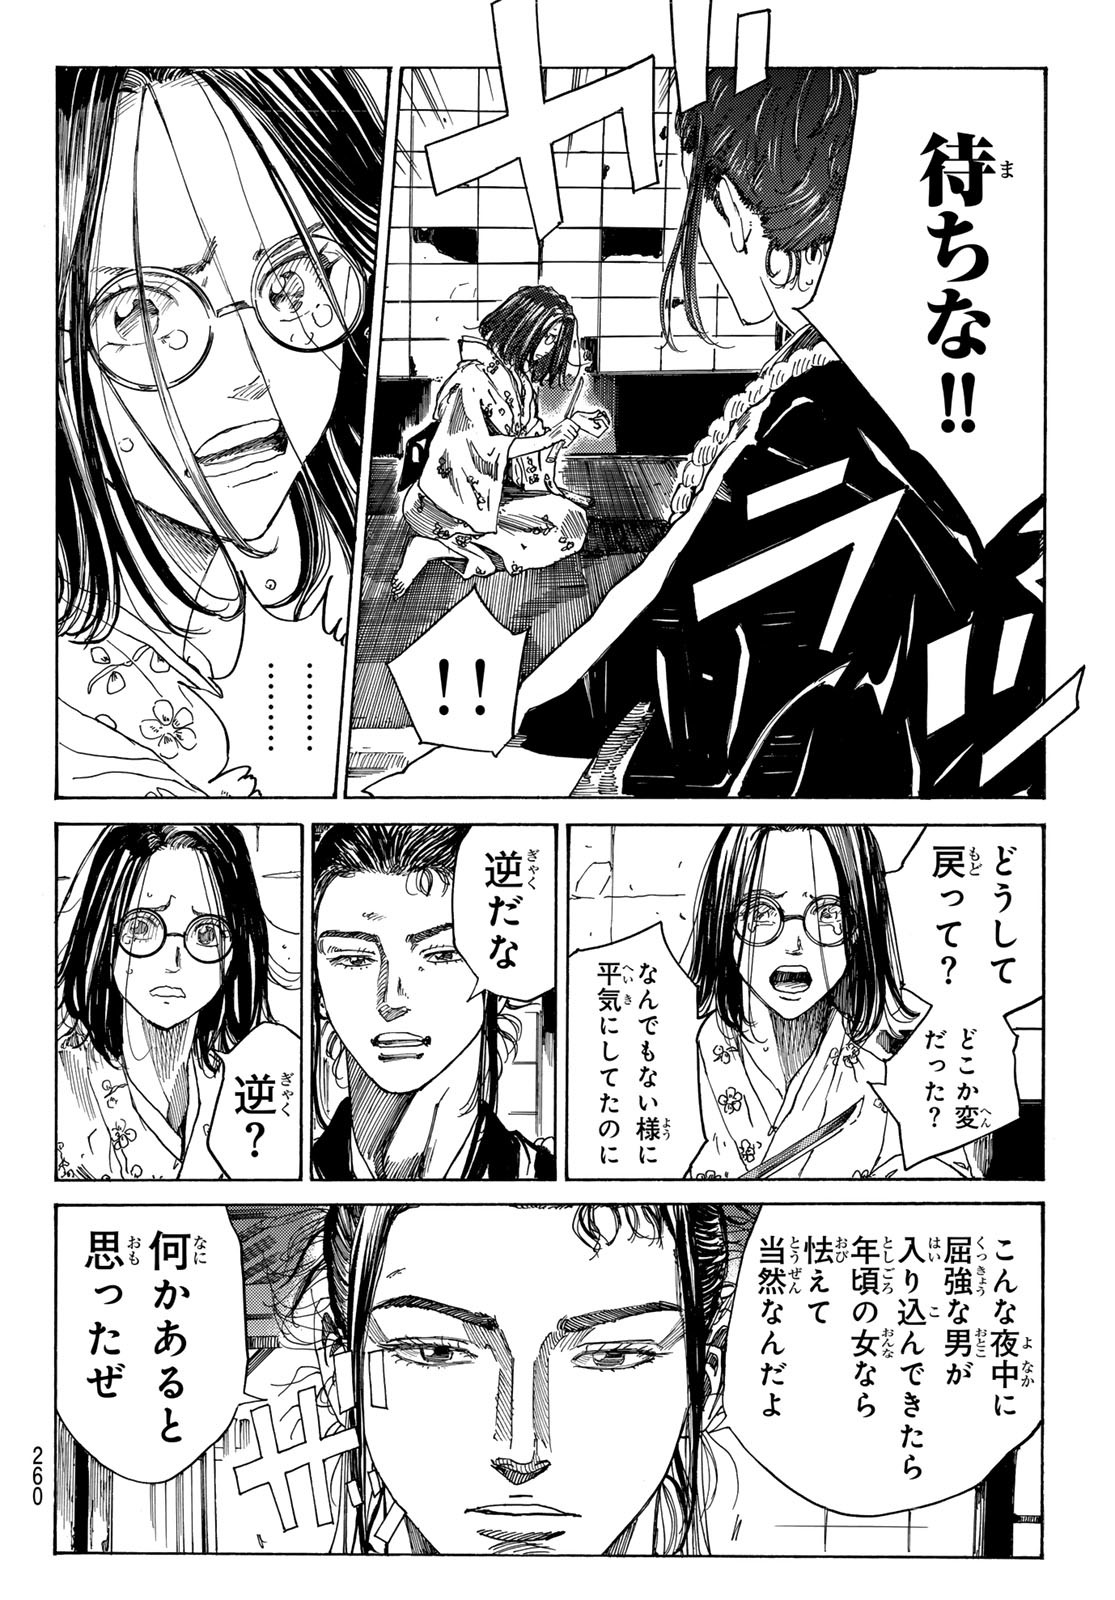 An Mo Miburo 第90話 - Page 4